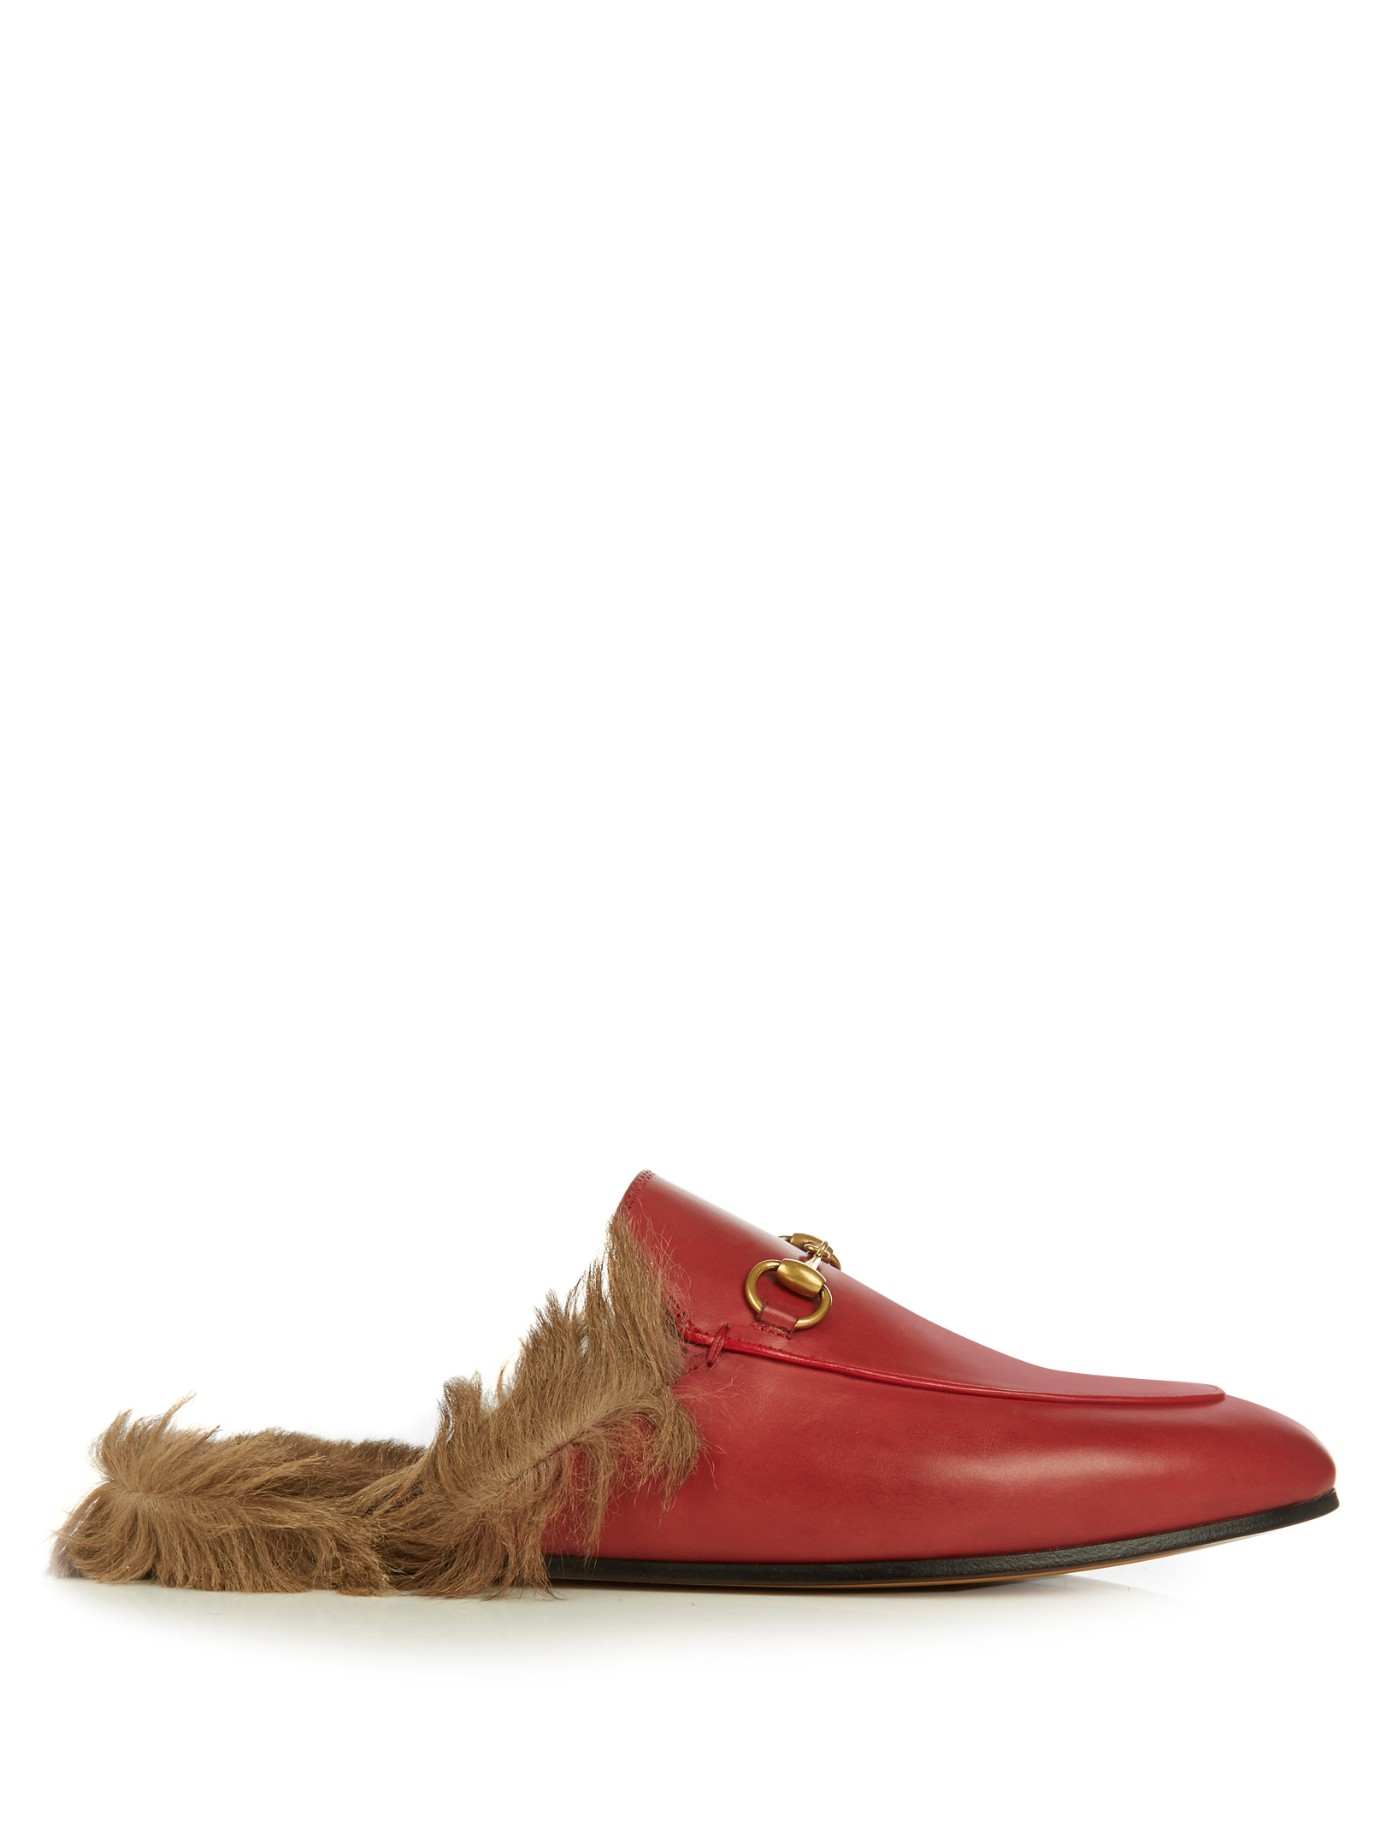 brugt podning Uenighed Gucci Princetown Fur-Lined Leather Loafers in Red | Lyst